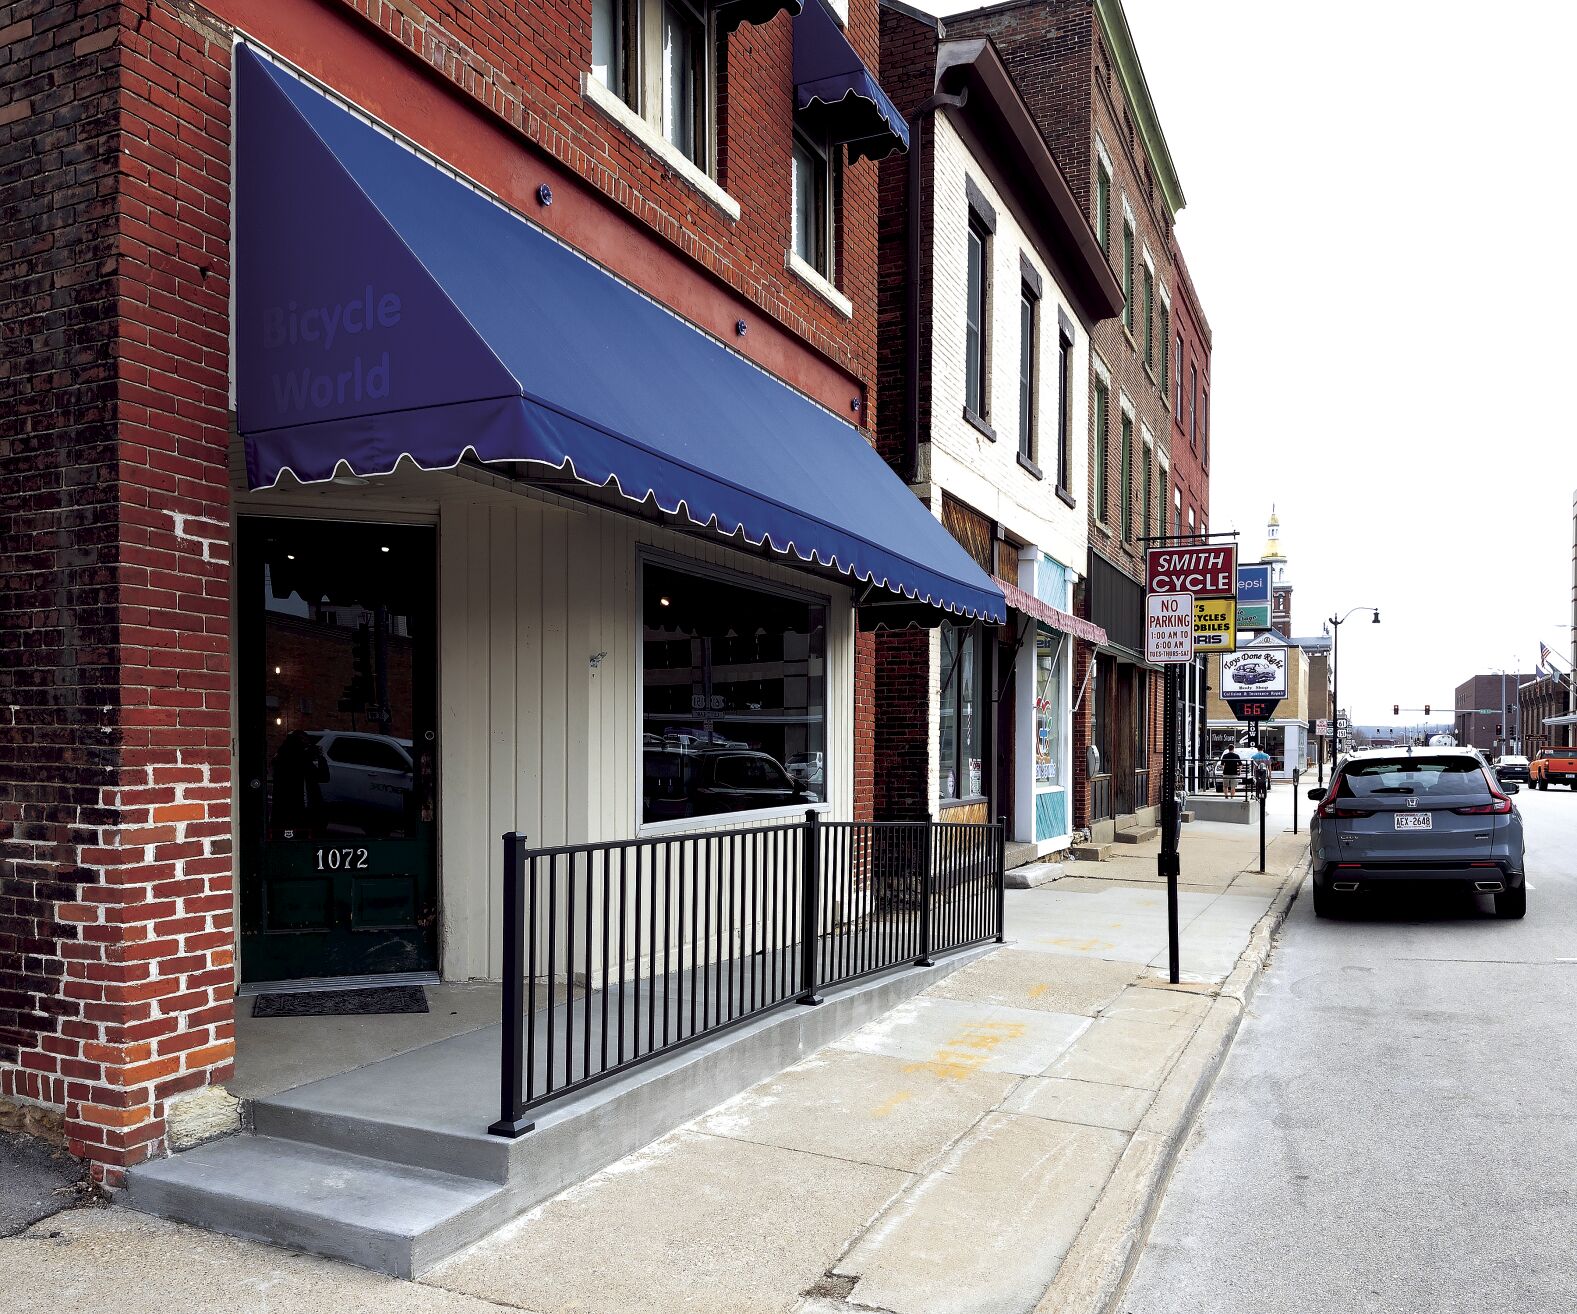 Exterior of River City Hair Co. recently opened at 1072 Central Ave. in Dubuque, the former location of Bicycle World.    PHOTO CREDIT: Stephen Gassman